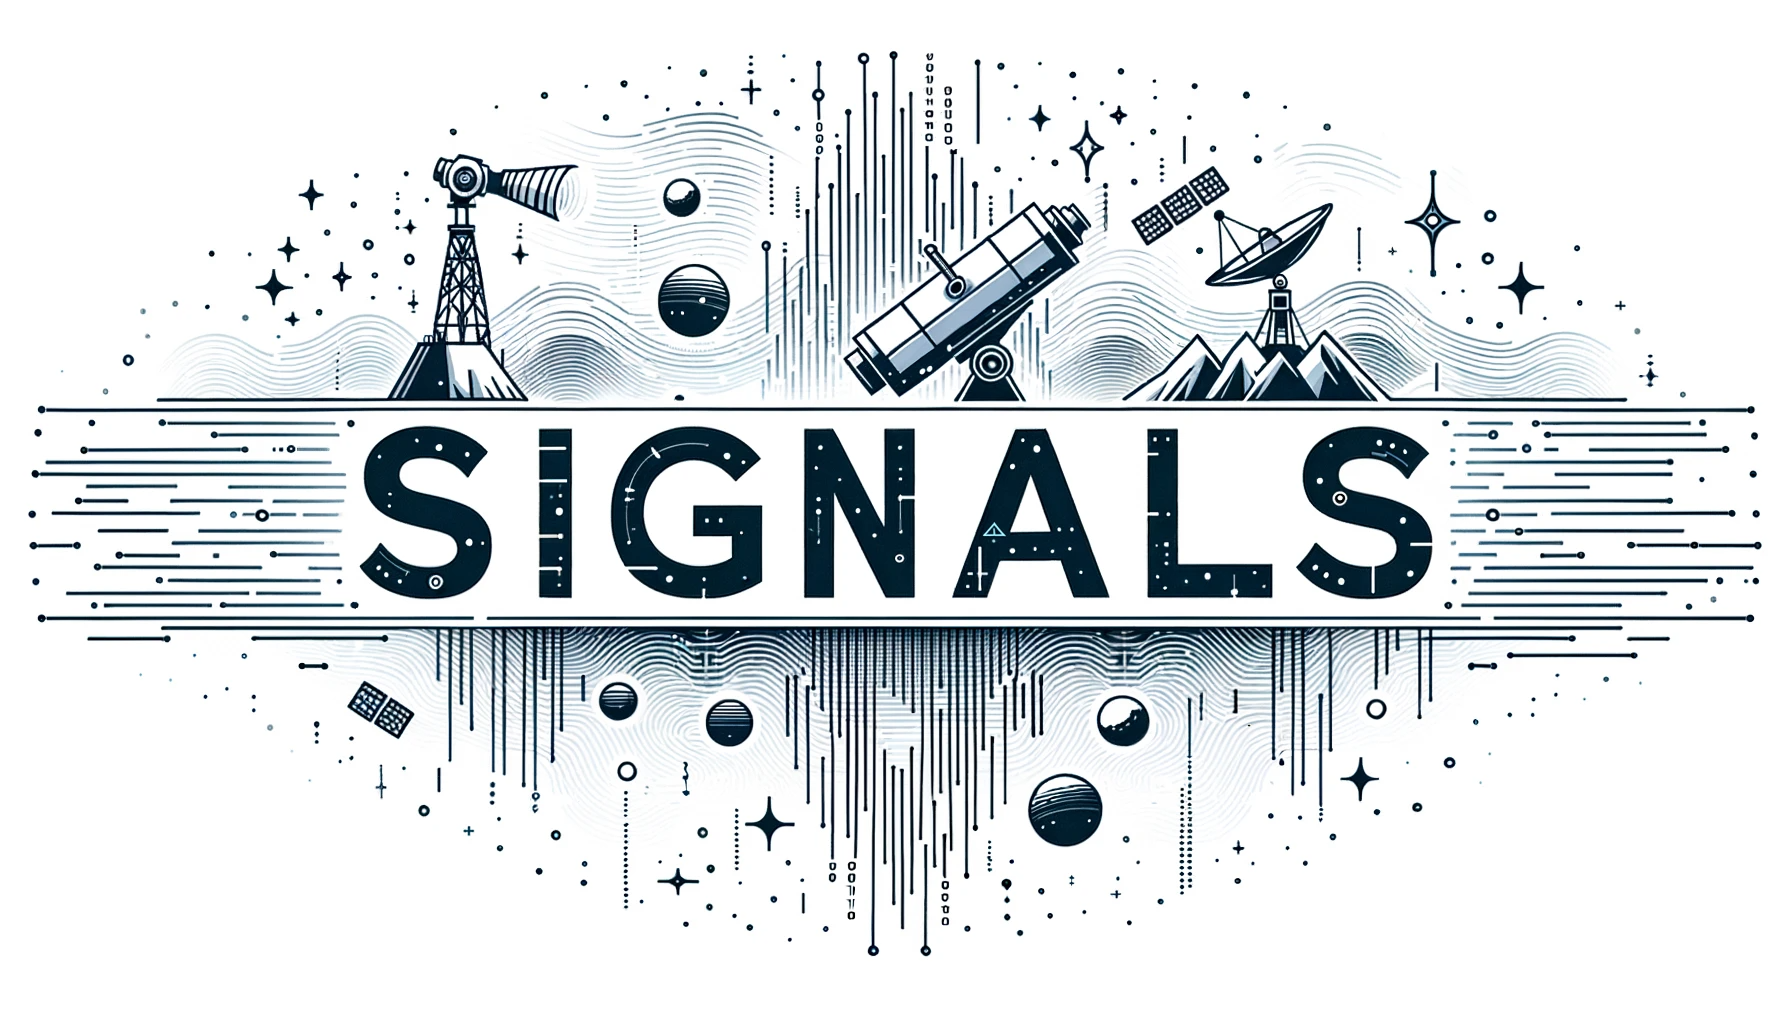 Illustration of a wide futuristic logo. 'SIGNALS' stands out in the middle in a futuristic and sharp font